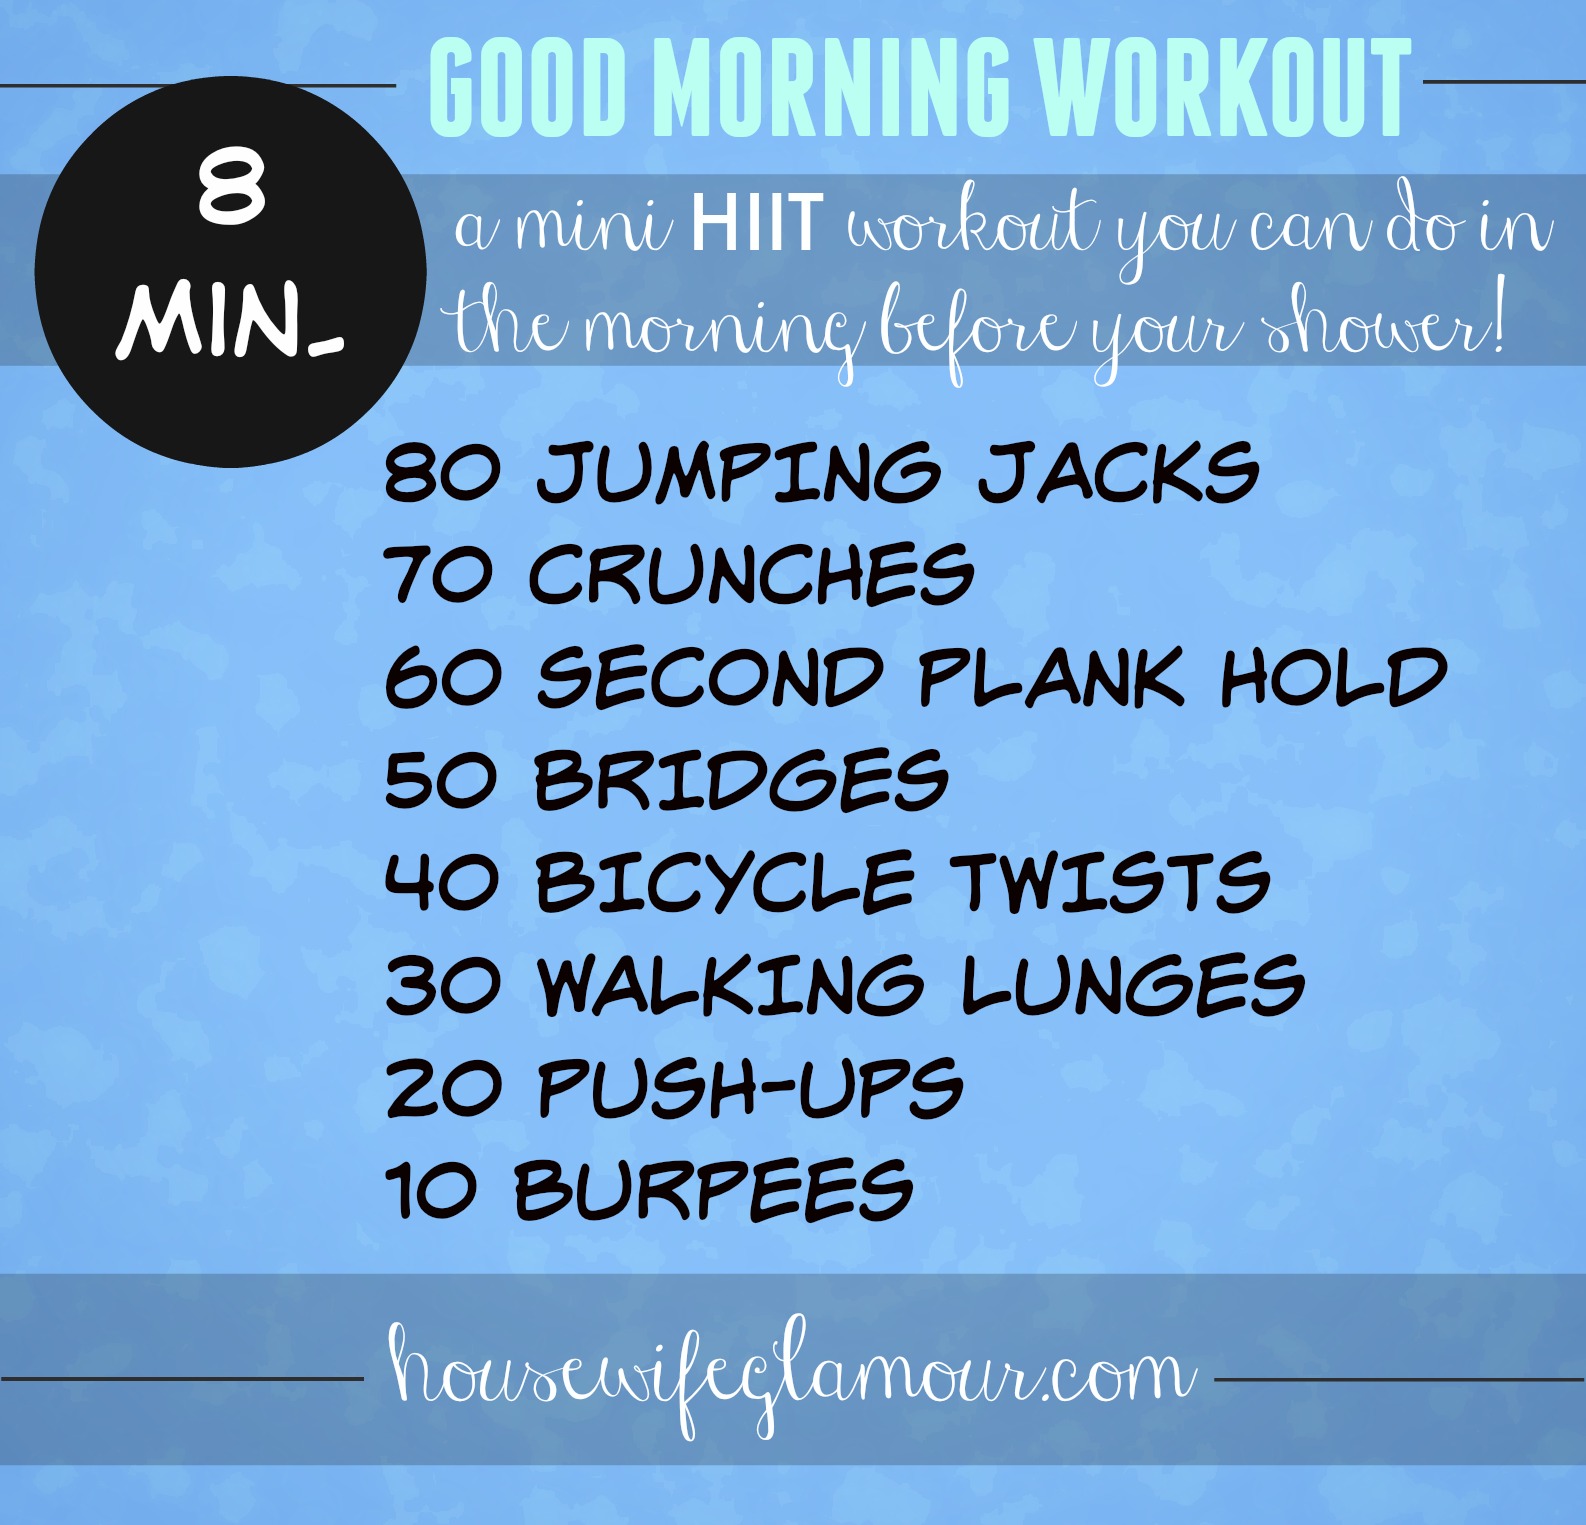 12 Weight Loss Morning Workouts To Burn Maximum Calories! - TrimmedandToned